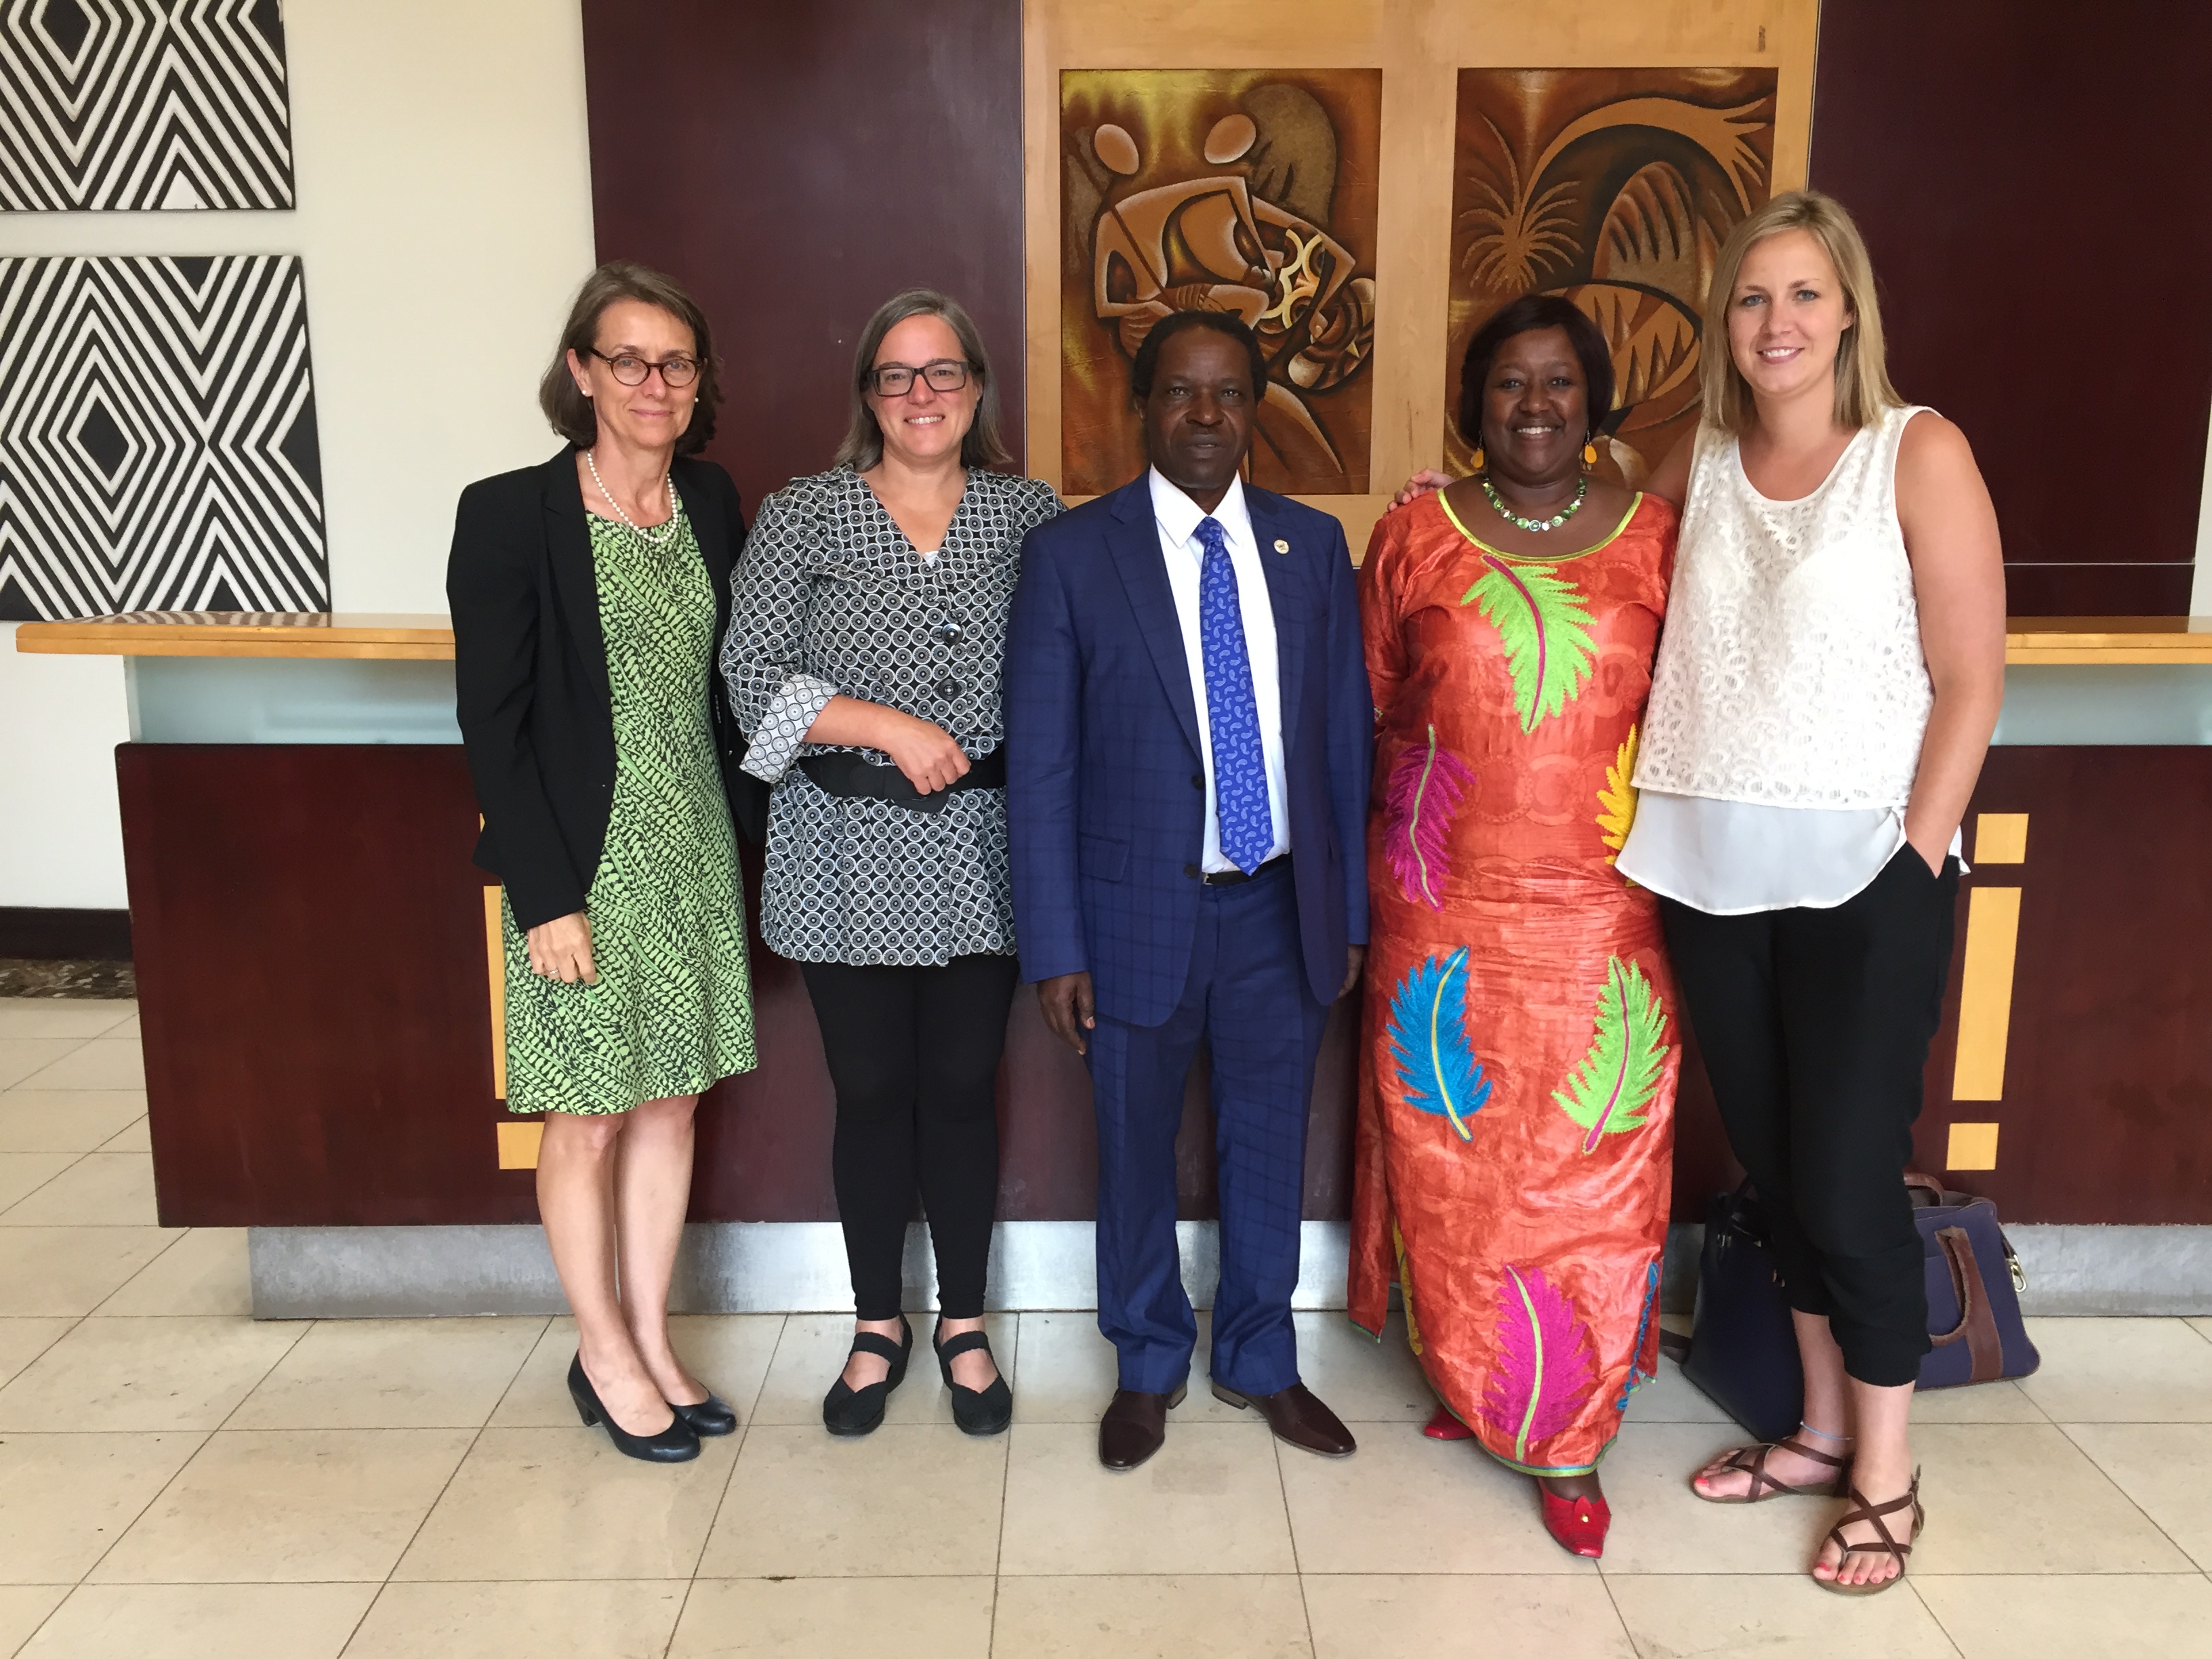 From left to right: Dean Deborah Kochevar, Professor Katey Pelican, Dean William Bazeyo, Vice Chancellor Agnes Binagwaho, and Assistant Director of UGHE's MGHD program, Dr. Phaedra Henley, attend the July 27th OHCEA induction ceremony in Kigali, Rwanda.